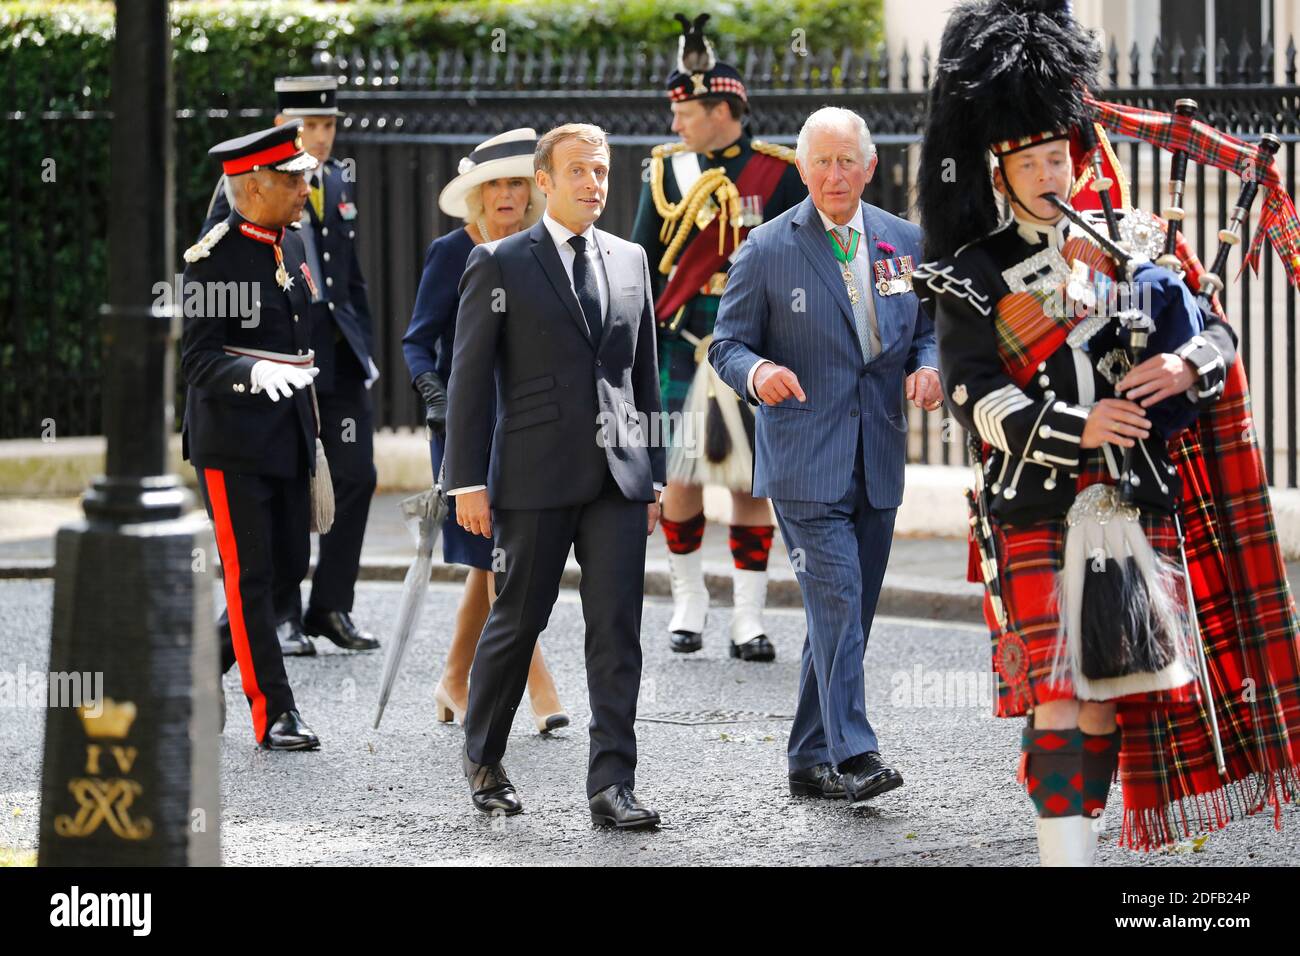 Britain's Camilla, Duchess of Cornwall (3rd L), Britain's Prince Charles, Prince of Wales (2nd R) and French President Emmanuel Macron (4th L) follow a piper as they arrive to lay wreaths at the statue of former French president Charles de Gaulle at Carlton Gardens in central London on June 18, 2020 during a visit to mark the anniversary of former de Gaulle's appeal to French people to resist the Nazi occupation. - Macron visited London on June 18 to commemorate the 80th anniversary of former French president Charles de Gaulle's appeal to French people to resist the Nazi occupation during Worl Stock Photo